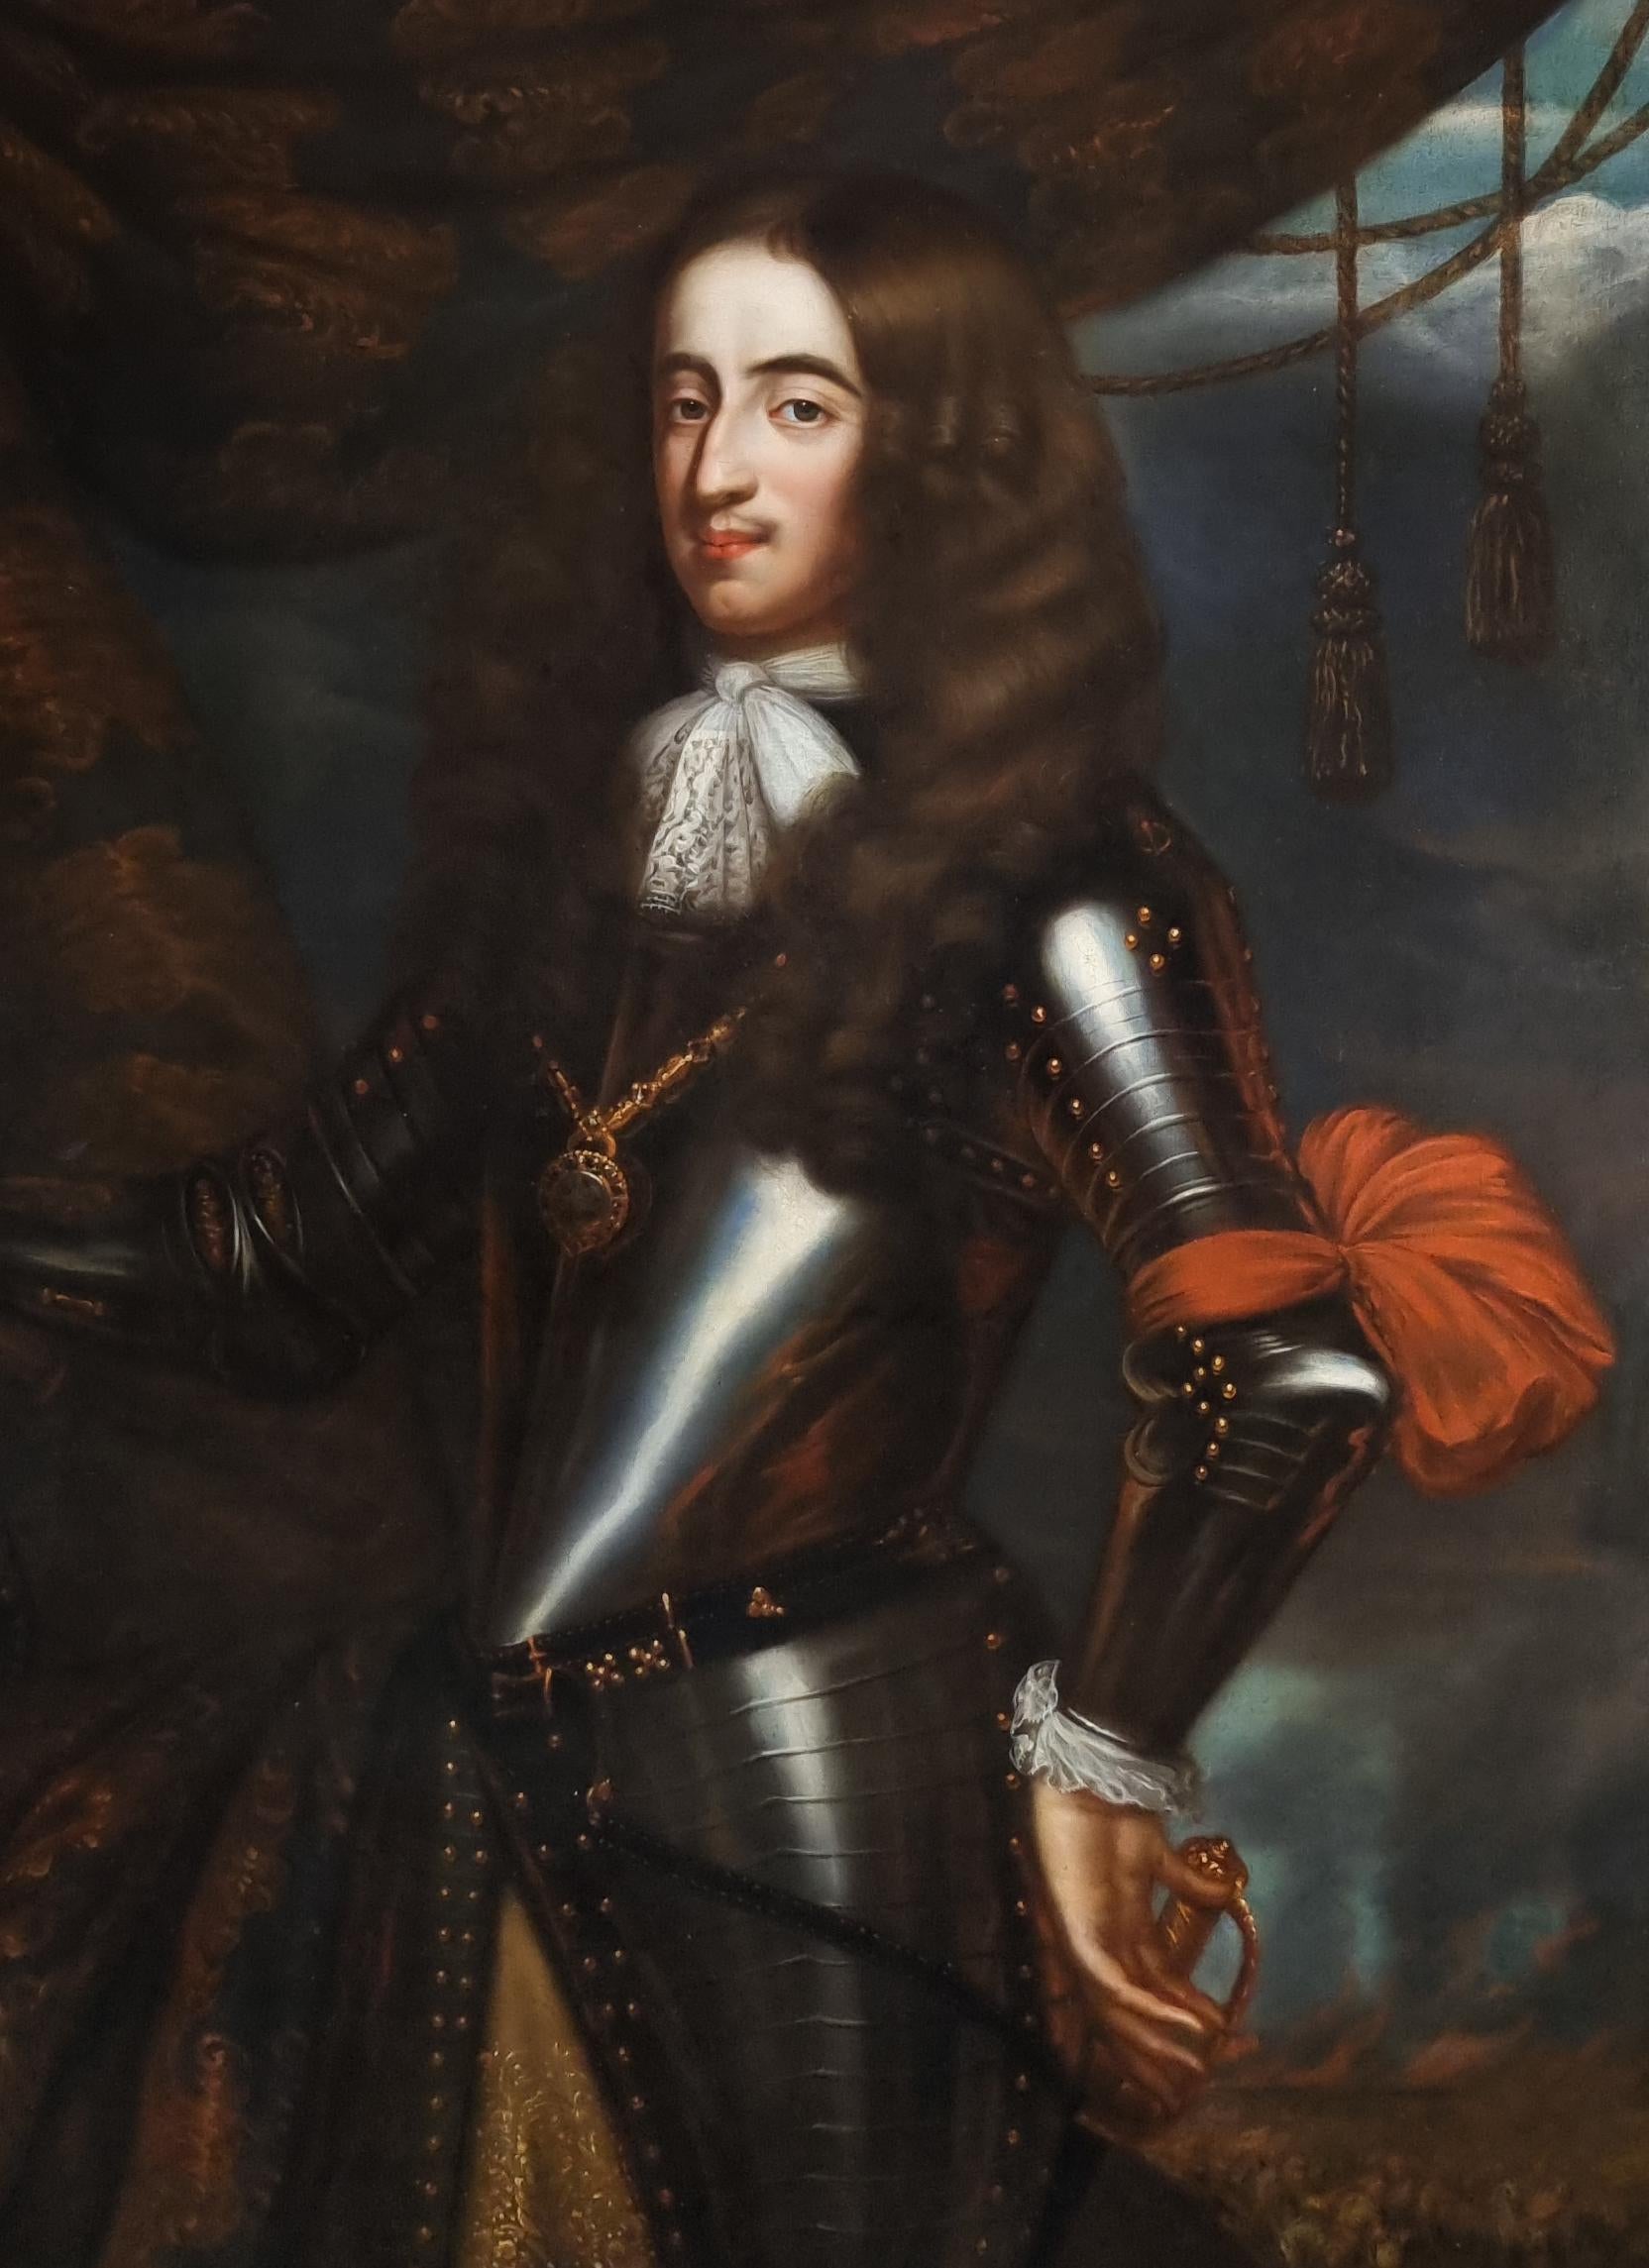 The sitter in this sumptuous grand scale portrait is King William III, sovereign Prince of Orange from birth, Stadtholder of Holland, Zeeland, Utrecht, Guelders, and Overijssel in the Dutch Republic from the 1670s and King of England, Ireland, and